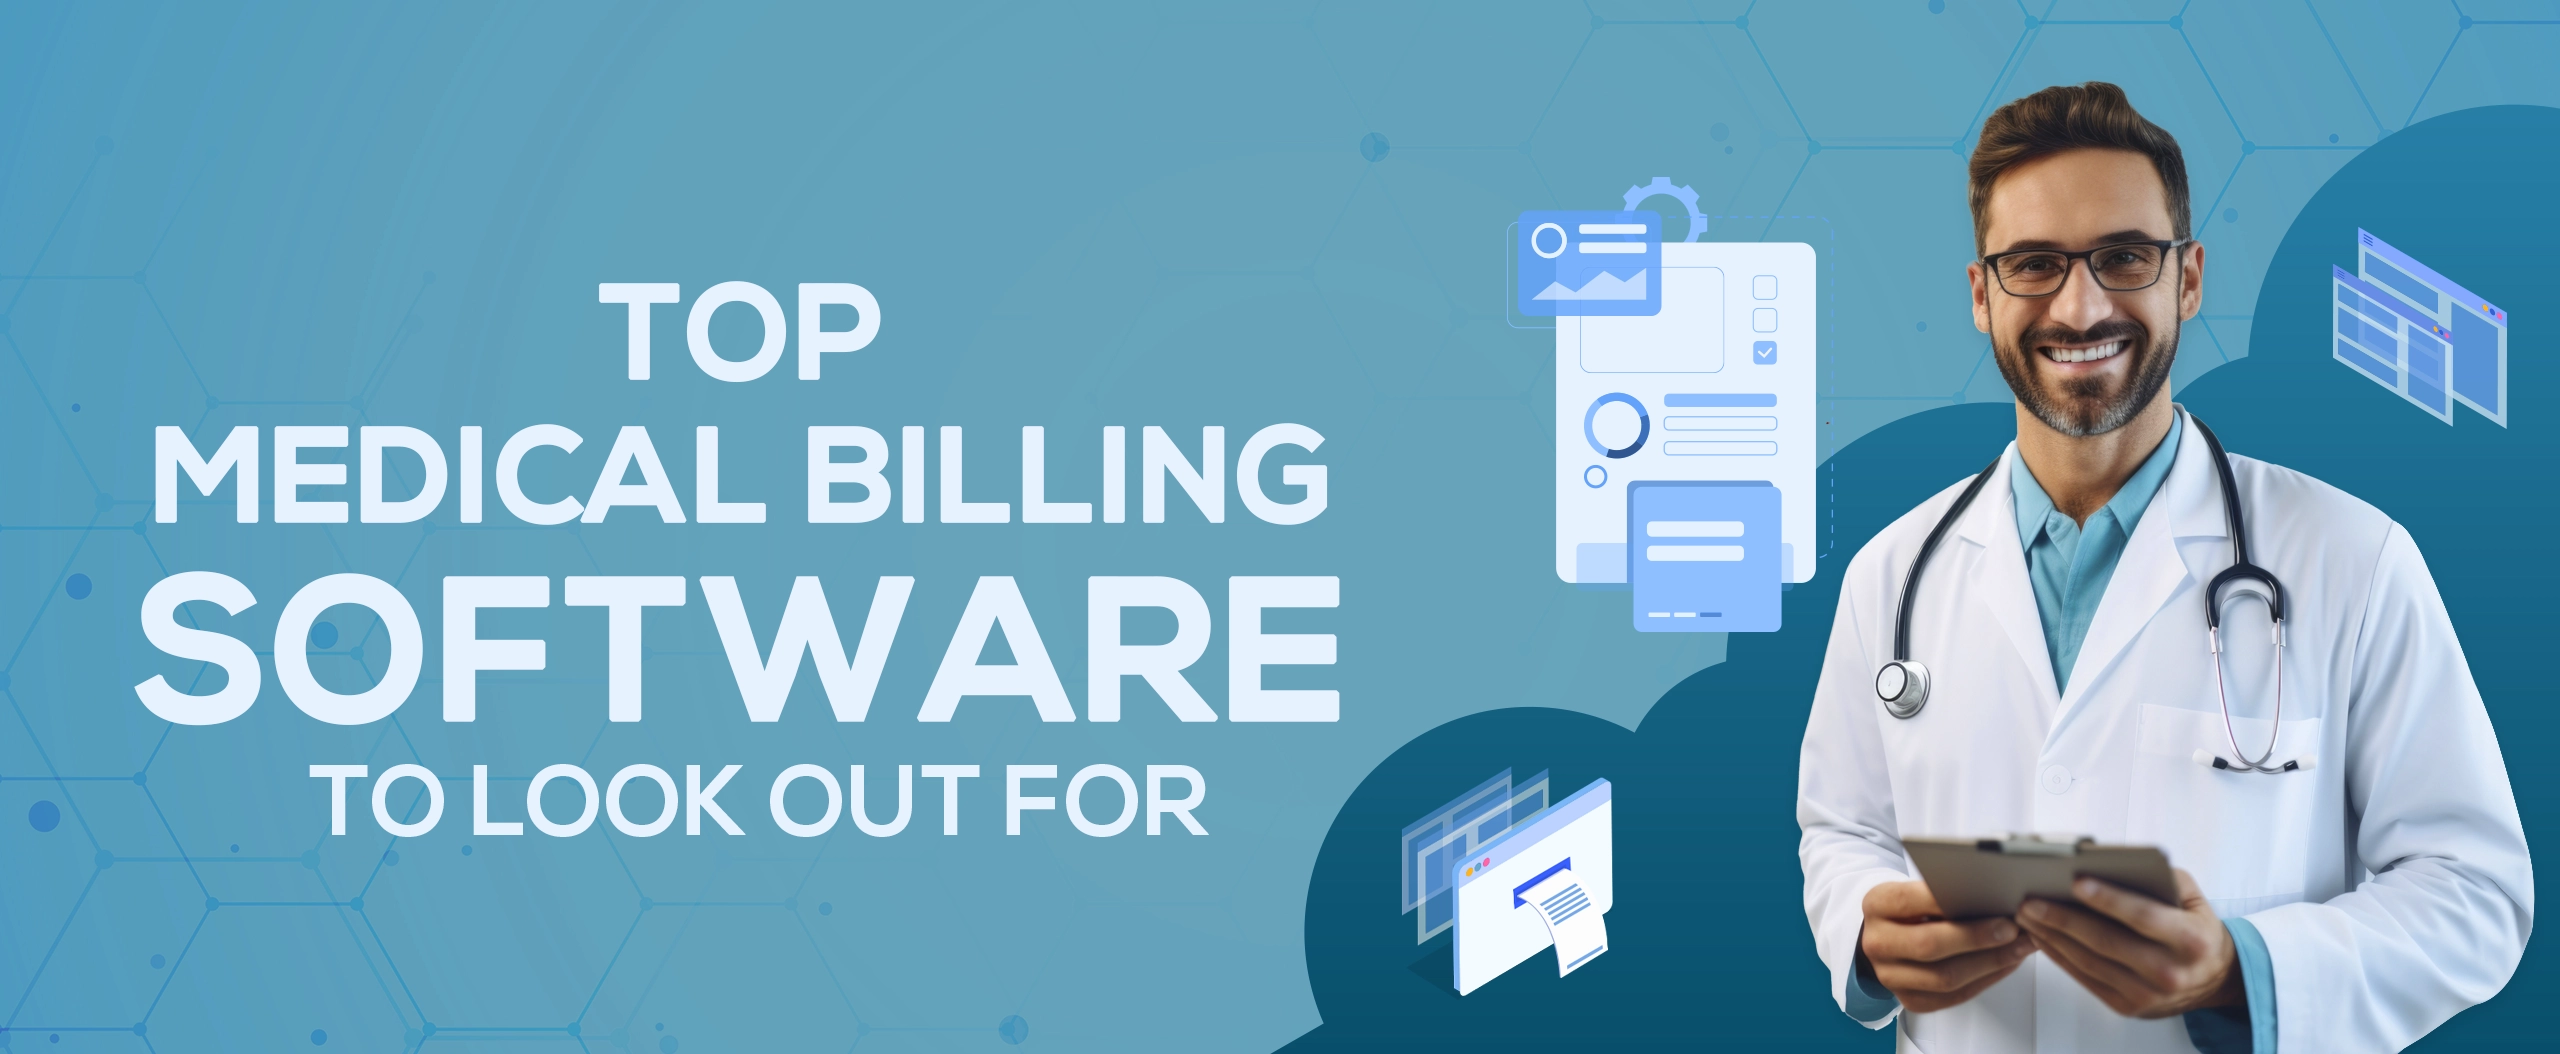 Top Medical Billing Software to Look Out For